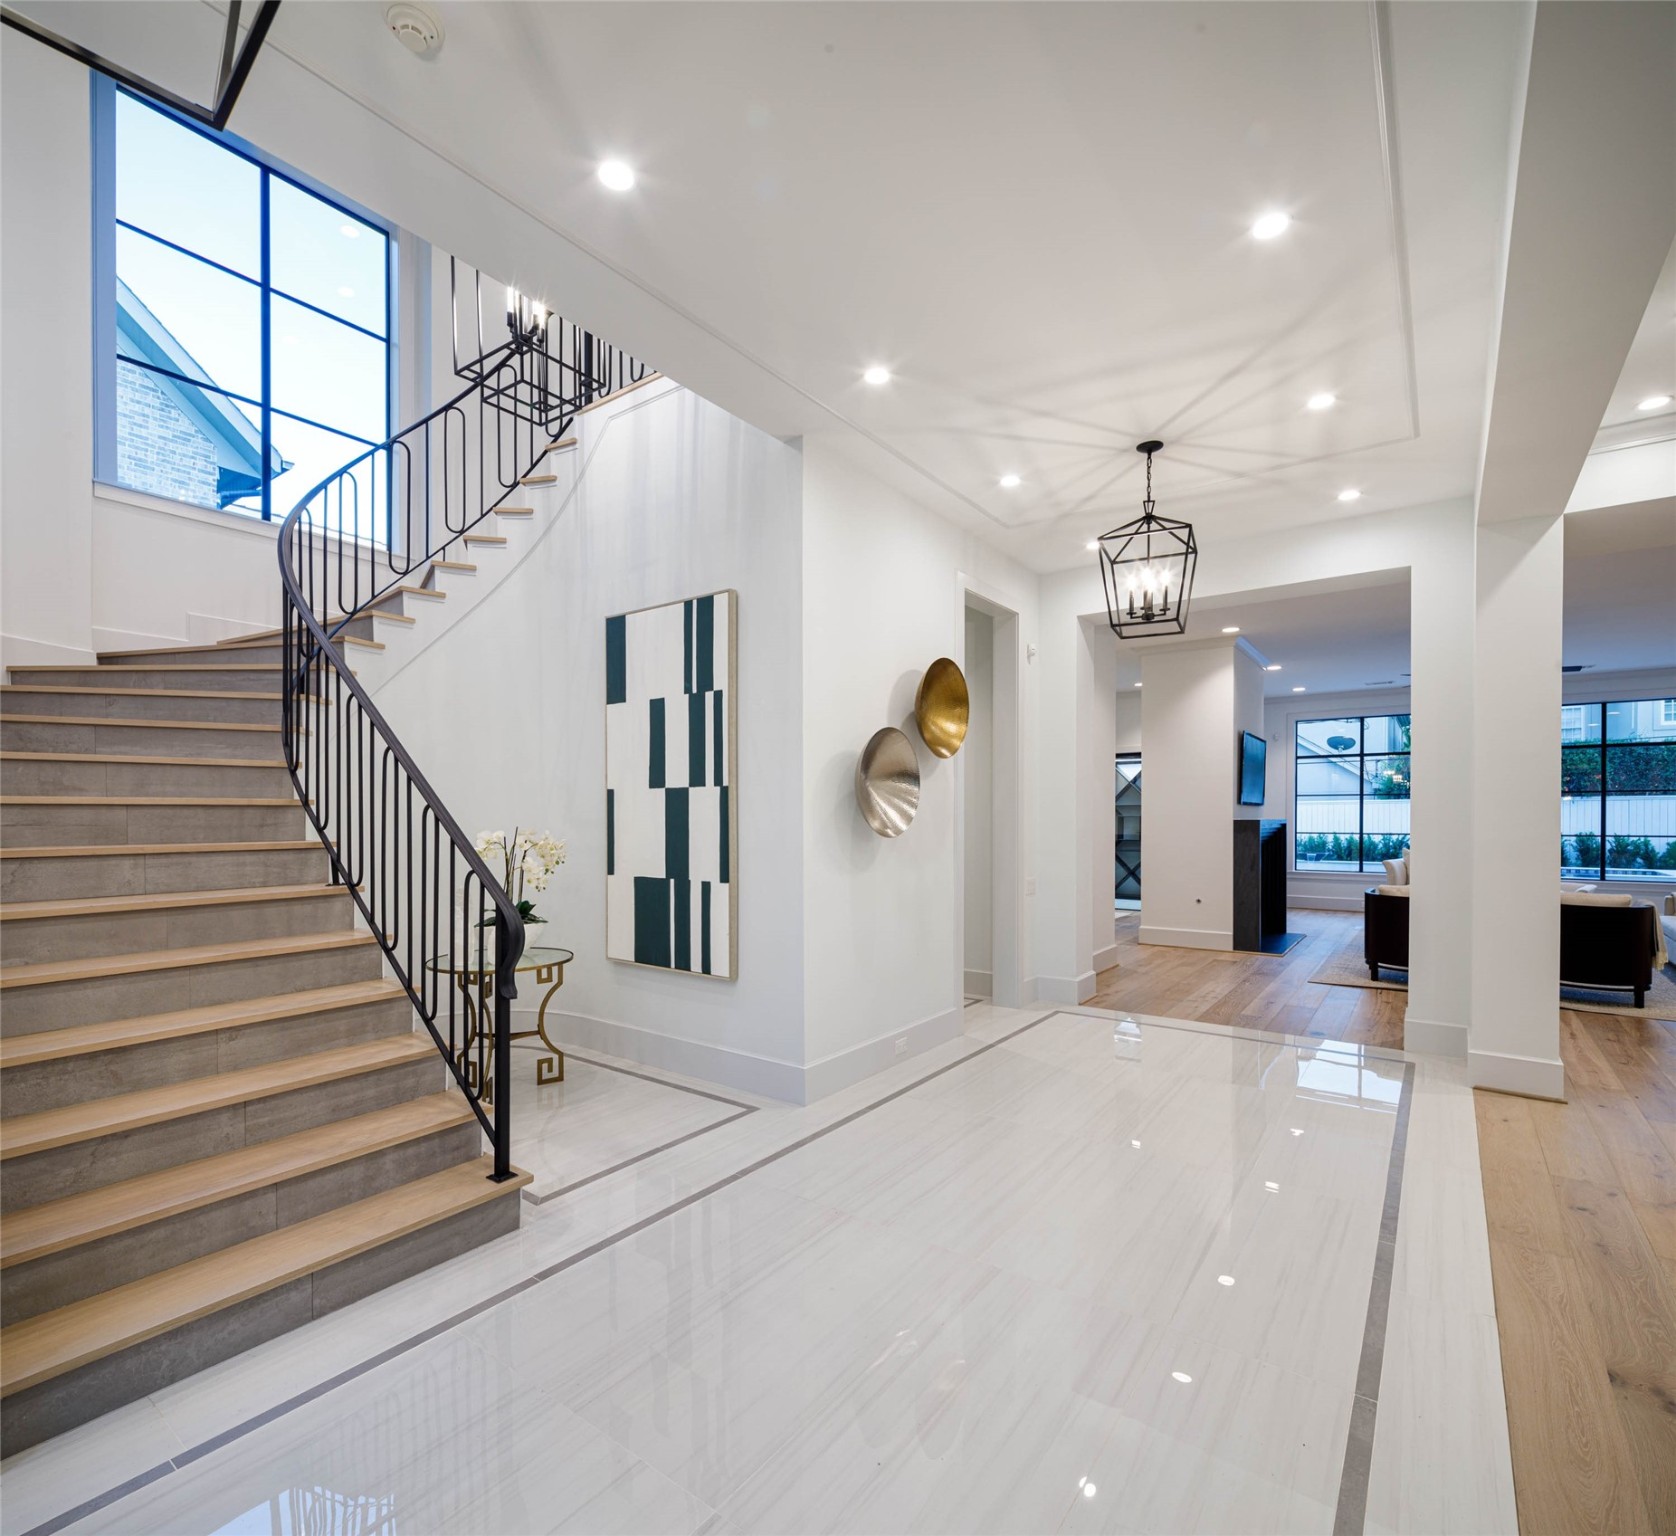 Grand entry foyer featuring beautiful Porcelain floors and two elegant designer chandelier. Opens to a private office making a stunning first impression of effortless elegance and sophisticated touches